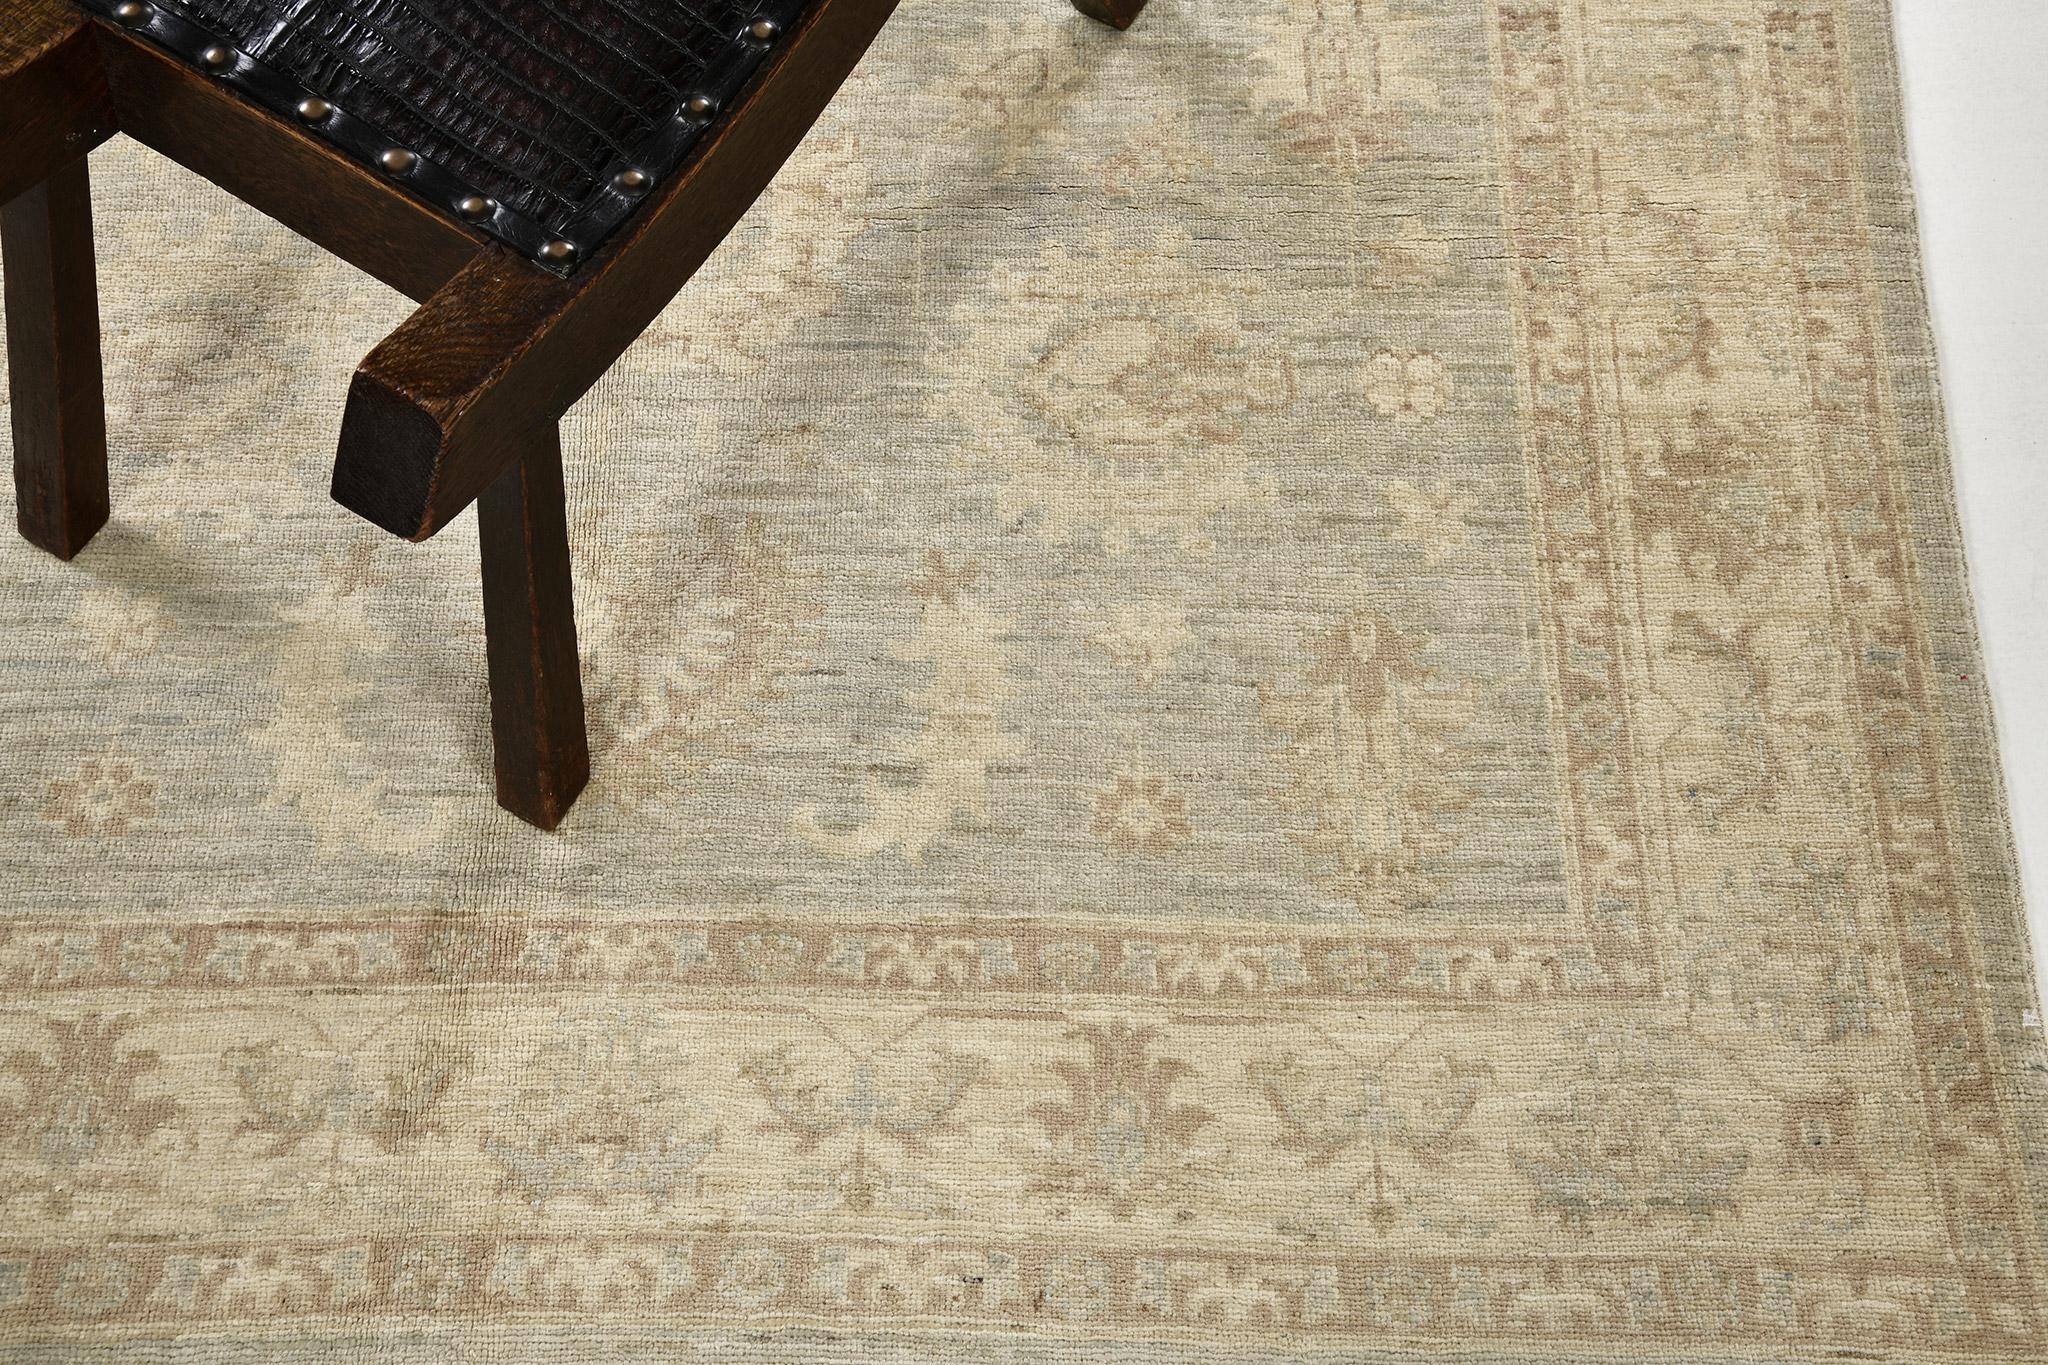 A stylish revival rug that has a mirrored pattern of an elegant floral scrolls and vine-formed medallions of umber brown and subdued ambience of skyblue with coffee brown borderlines.  This master work of art utilizes earthy and clay tones to create